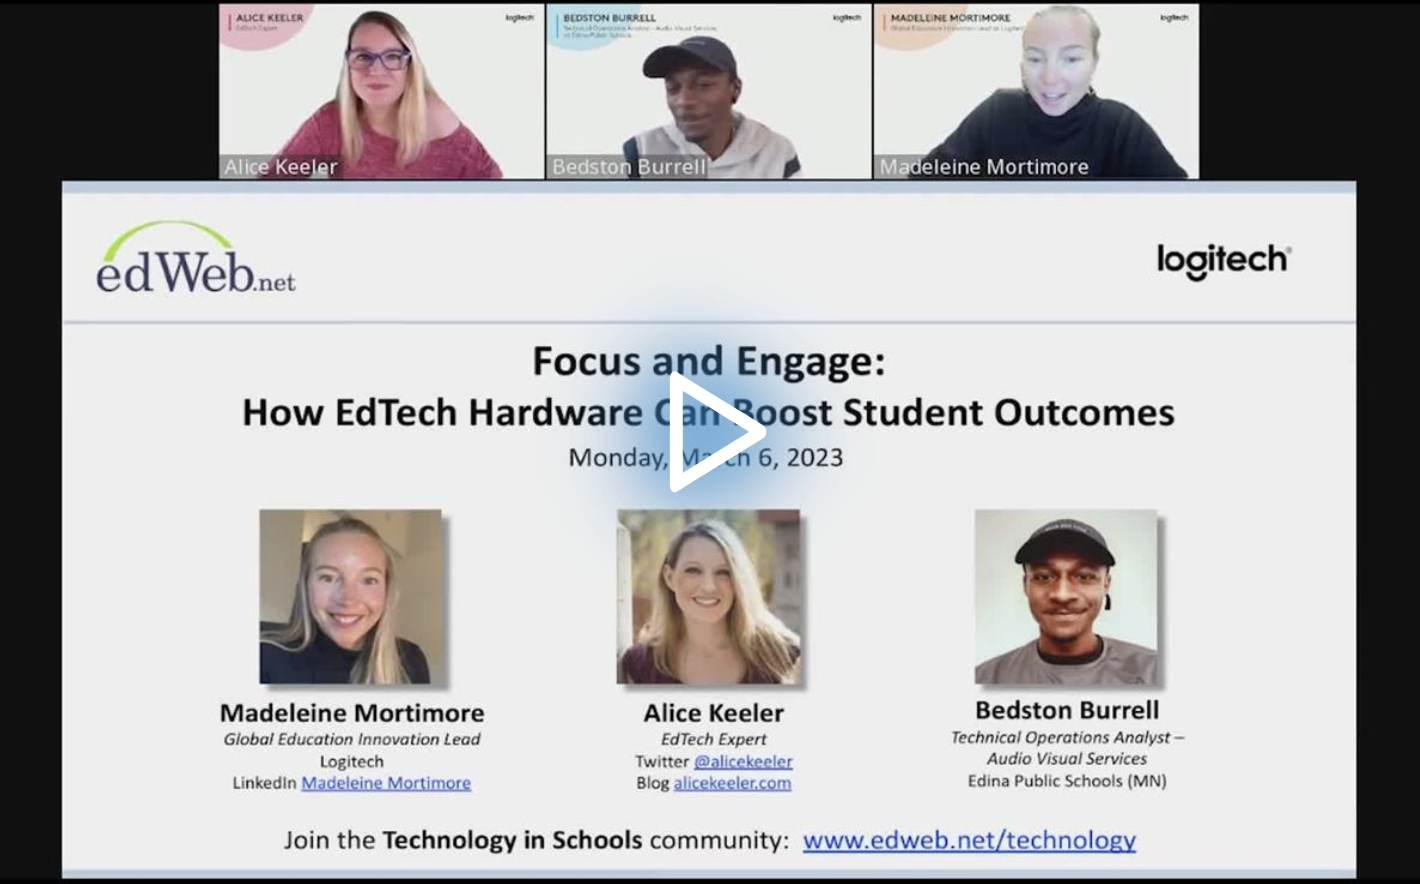 Focus and Engage: How EdTech Hardware Can Boost Student Outcomes edLeader Panel recording screenshot